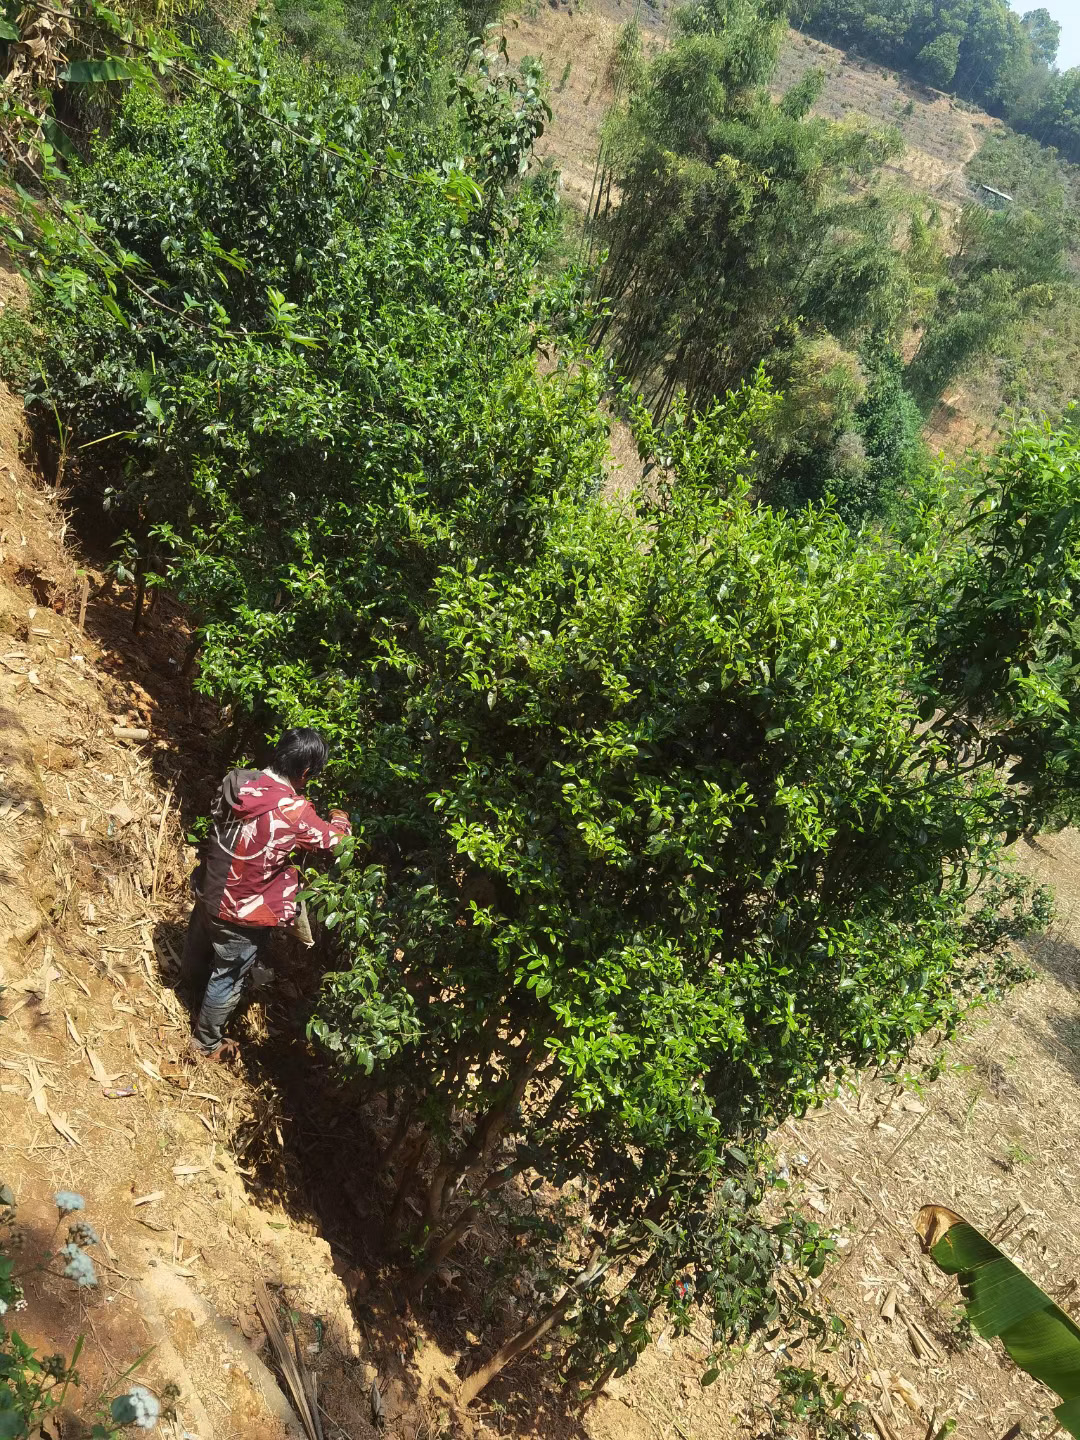 A person standing on a hillside to reach the leaves on the higher branches of a large Camellia taliensis tea tree with lots of green spring leaves. Patches of bamboo and other trees dot the background.